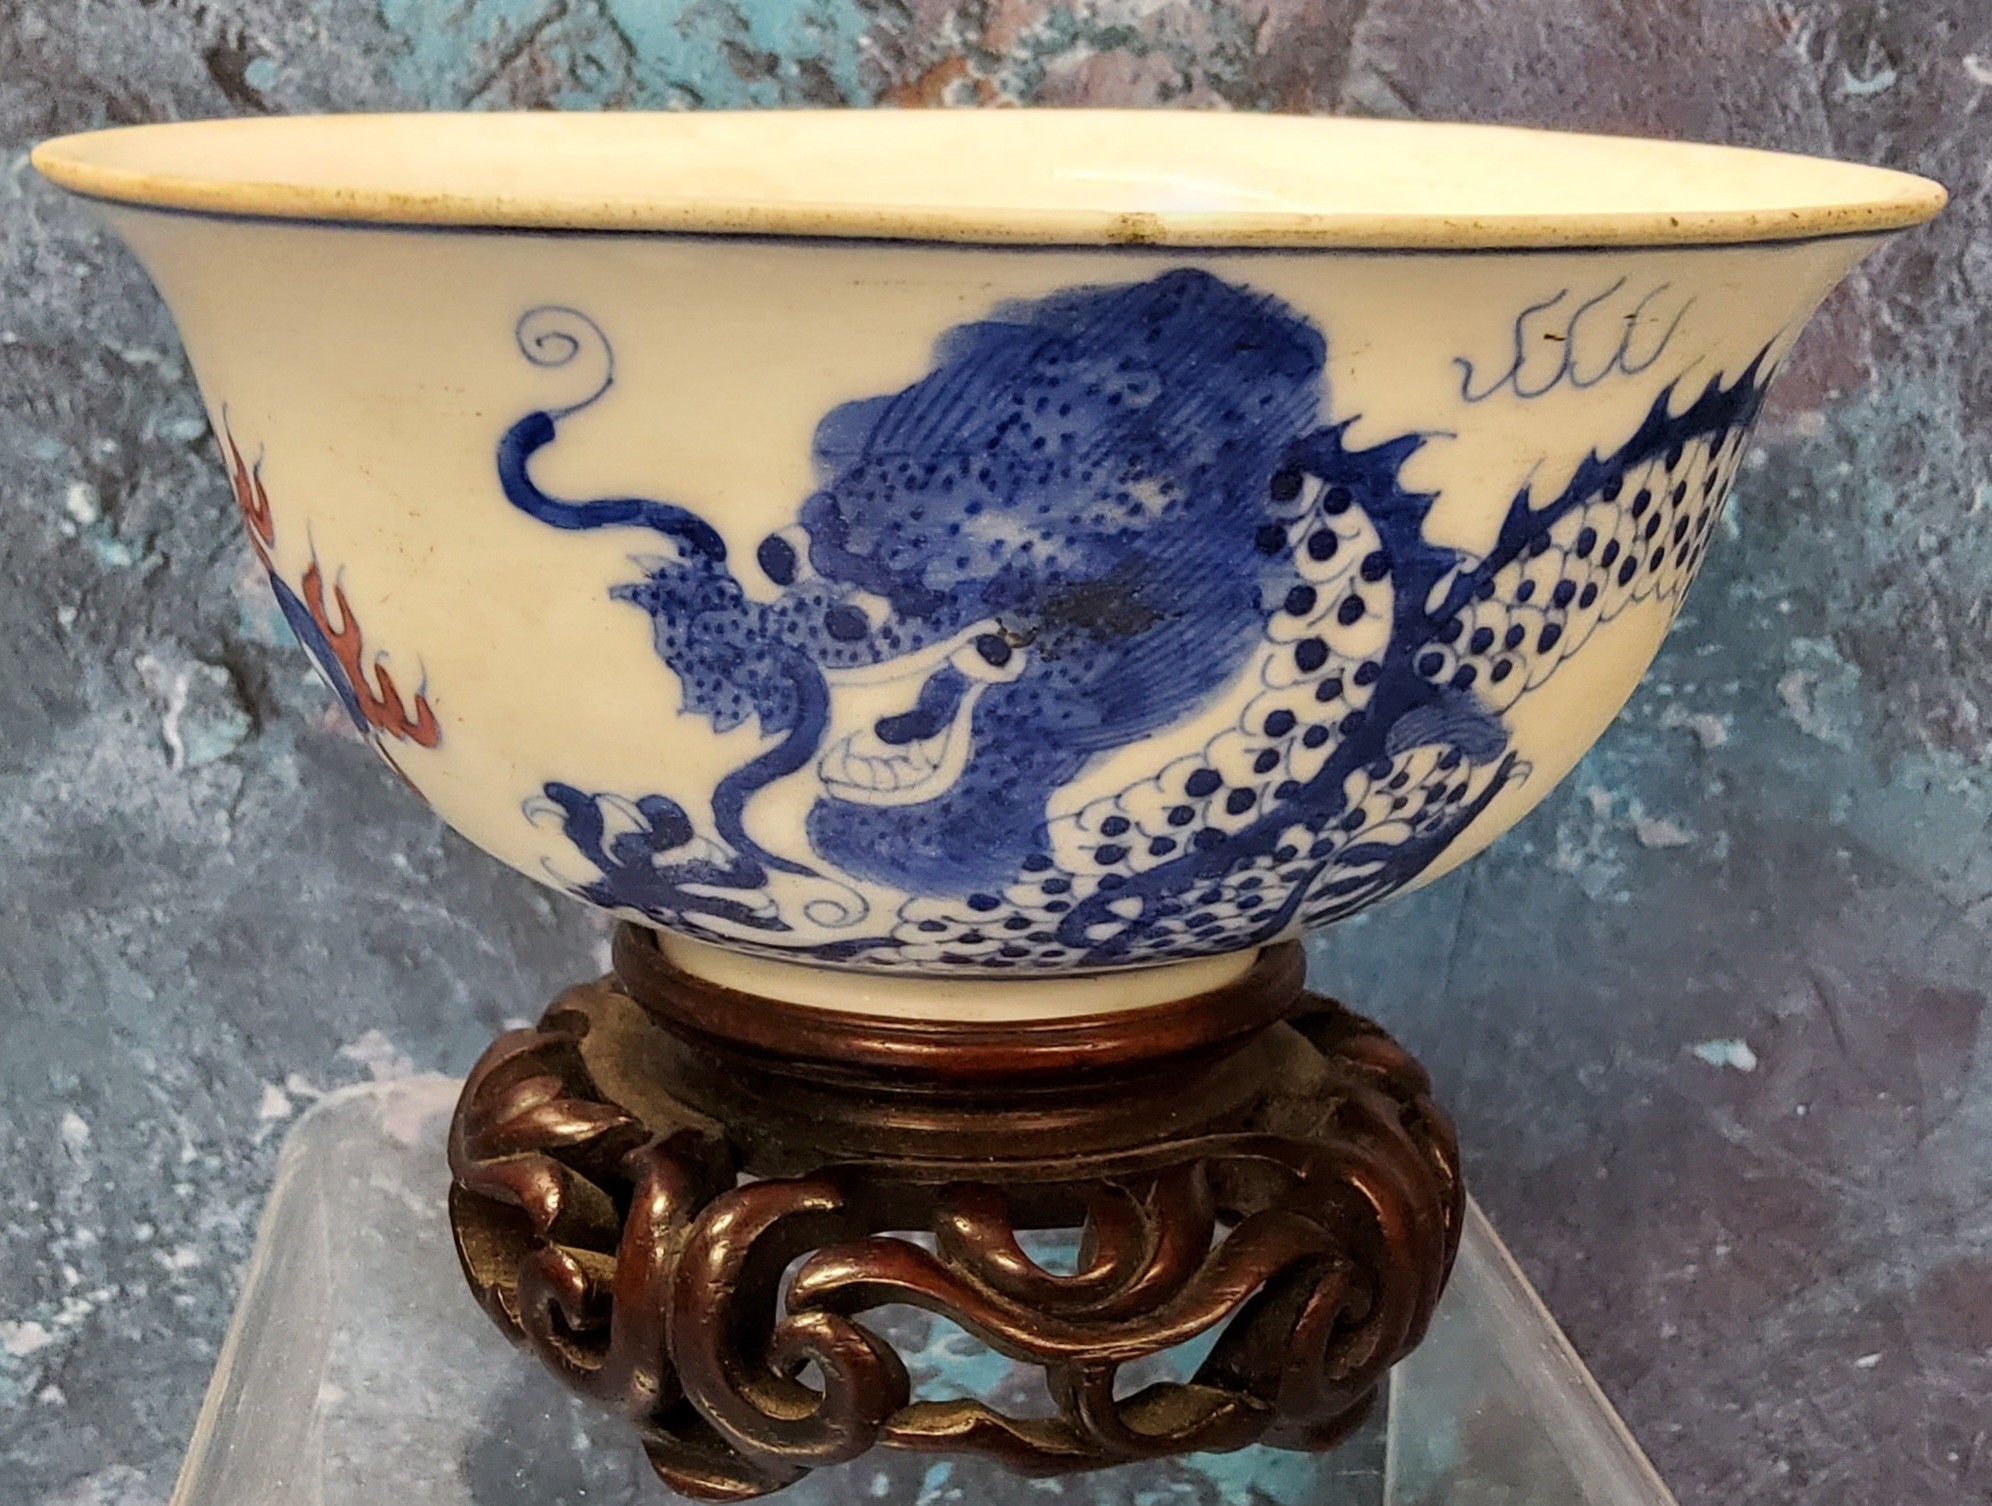 A 19th century Chinese bowl, the exterior in cobalt blue with the dragon chasing the flaming